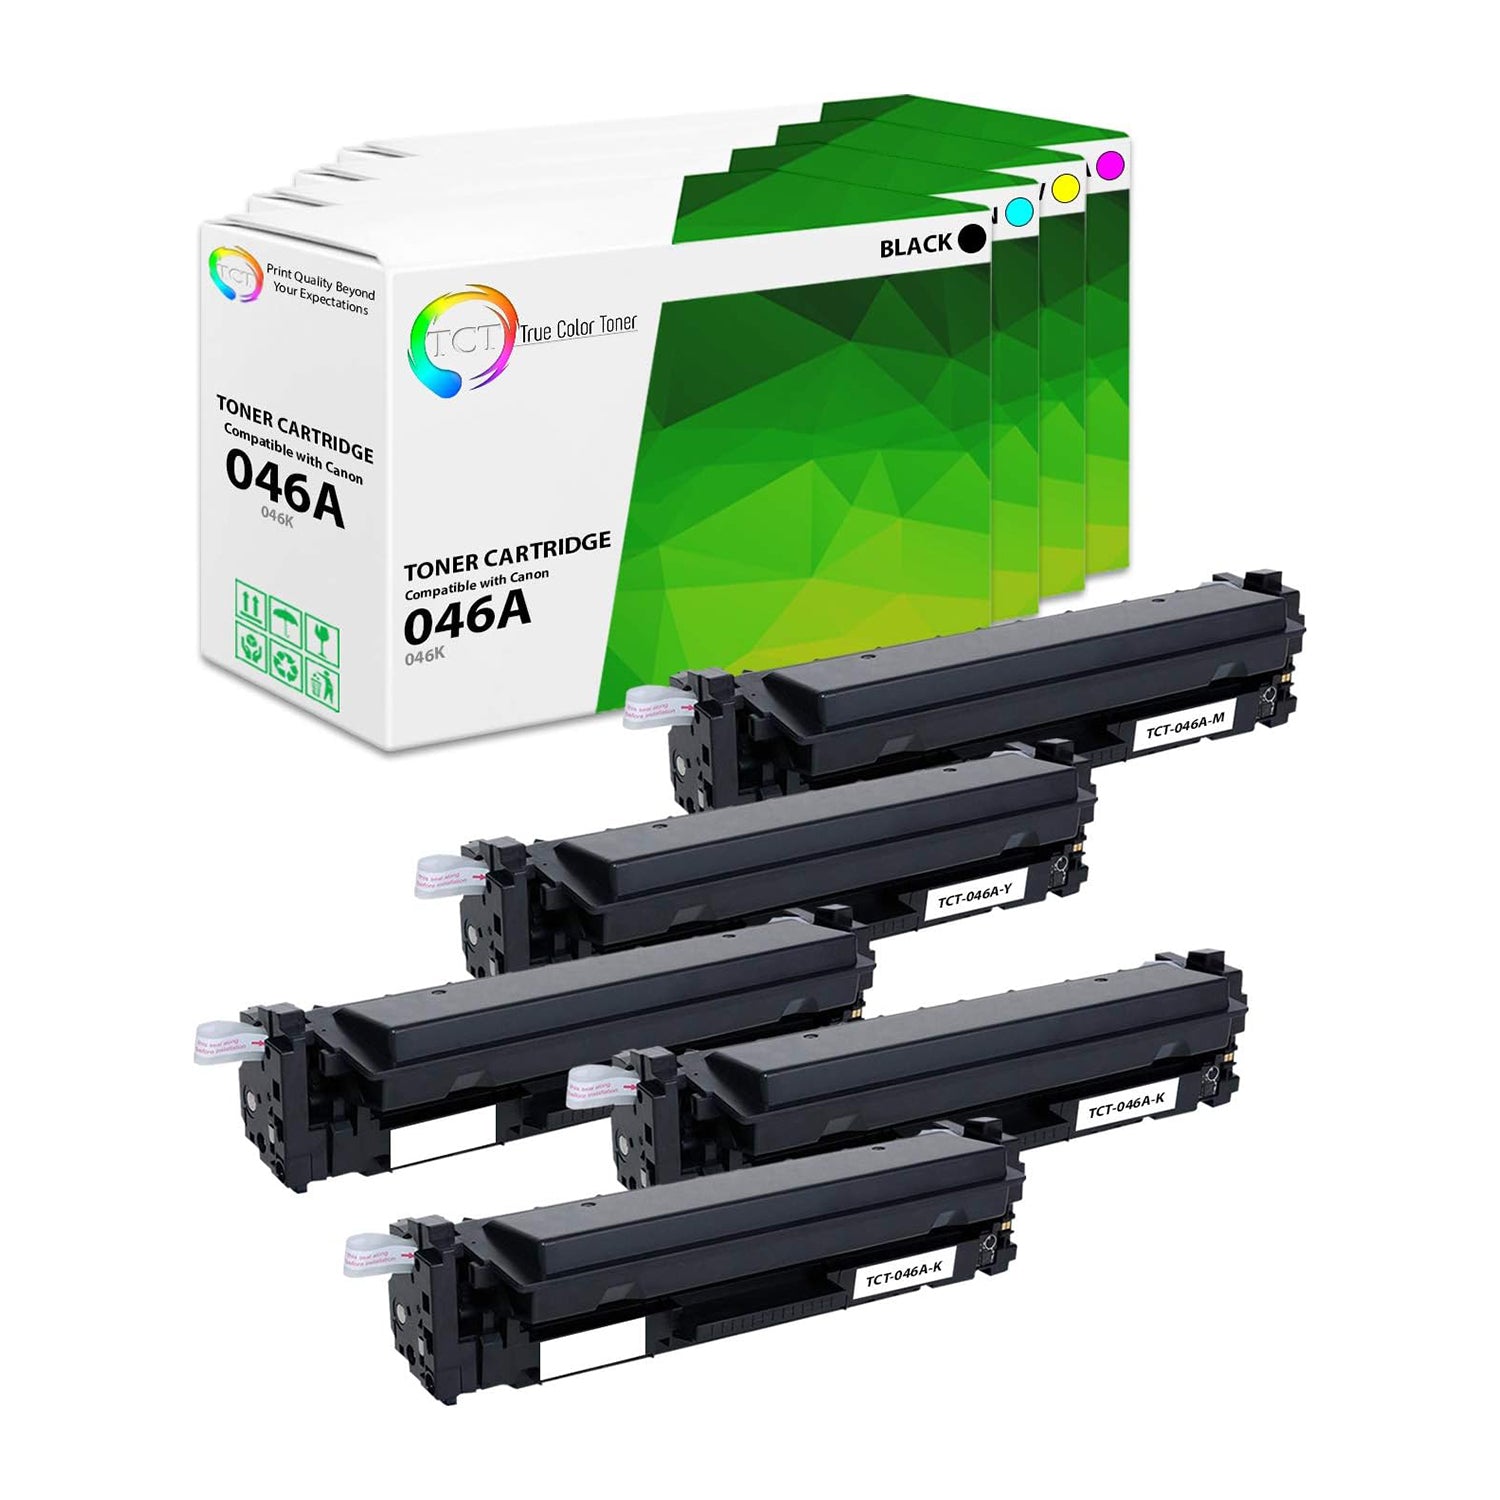 TCT Compatible Toner Cartridge Replacement for the Canon 046 Series - 5 Pack (BK, C, M, Y)